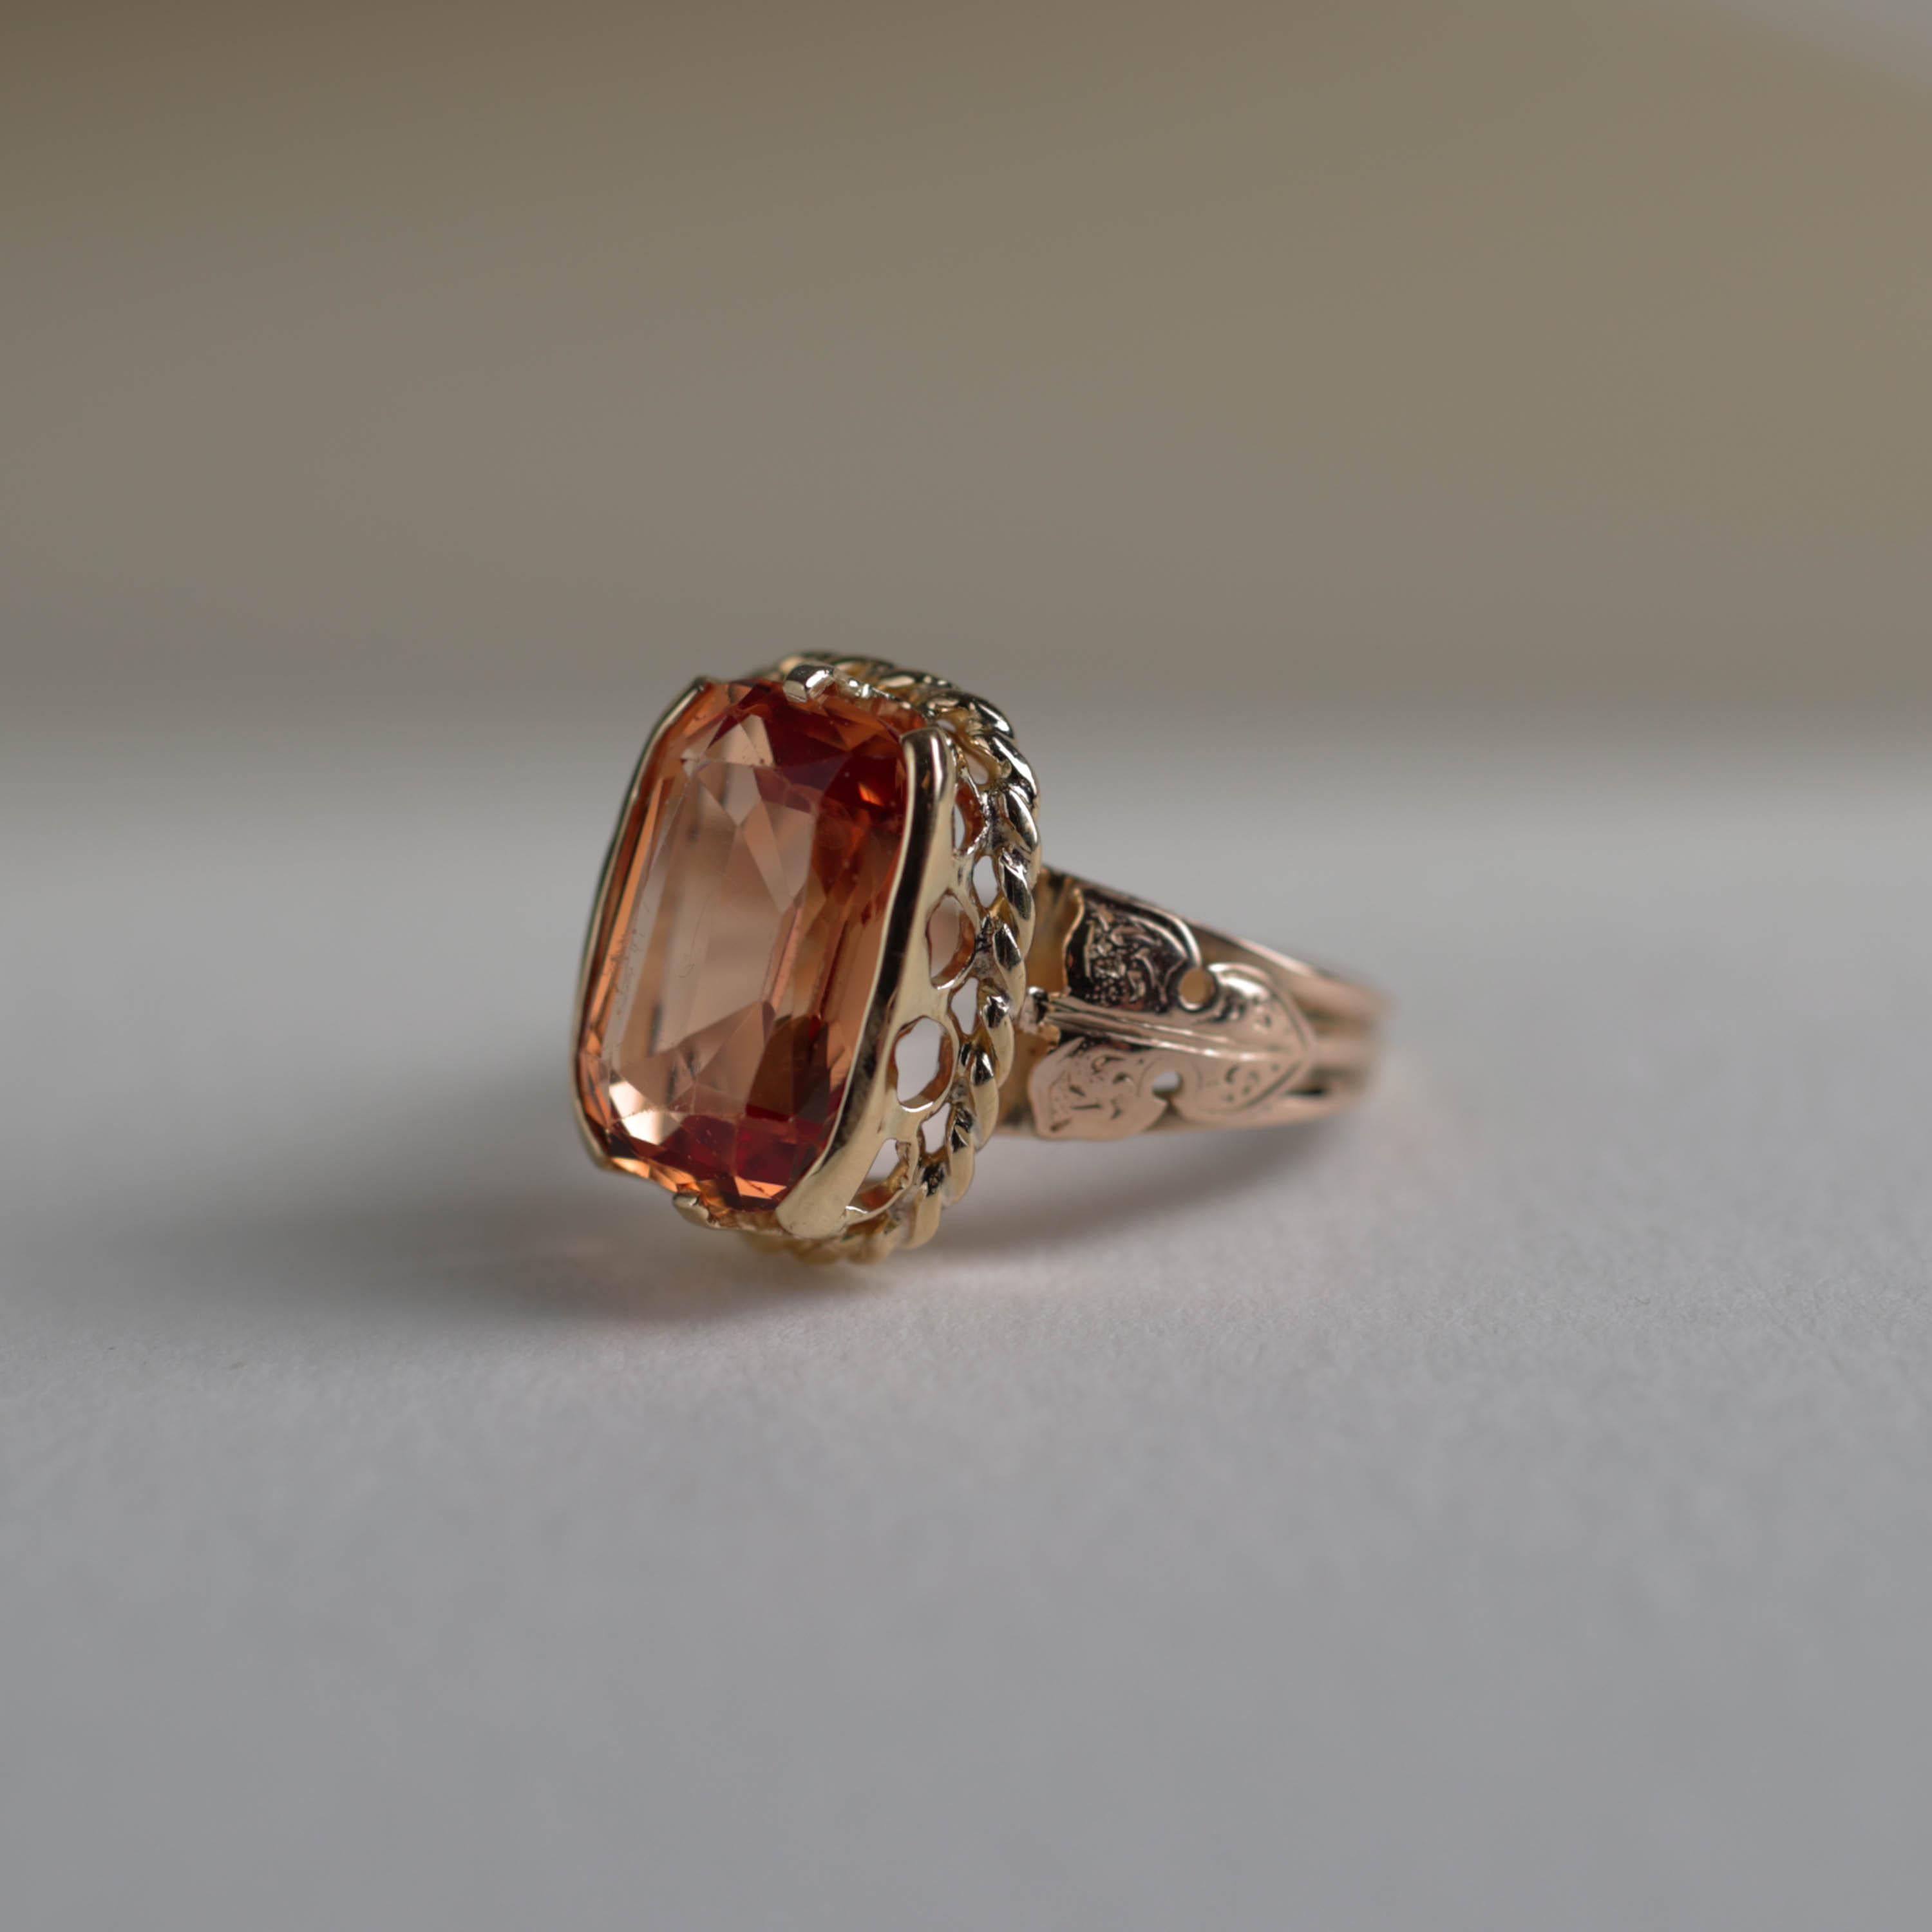 Imperial Topaz Ring Antique Certified Untreated Brazil Origin Size 8.5 In Excellent Condition For Sale In Southbury, CT